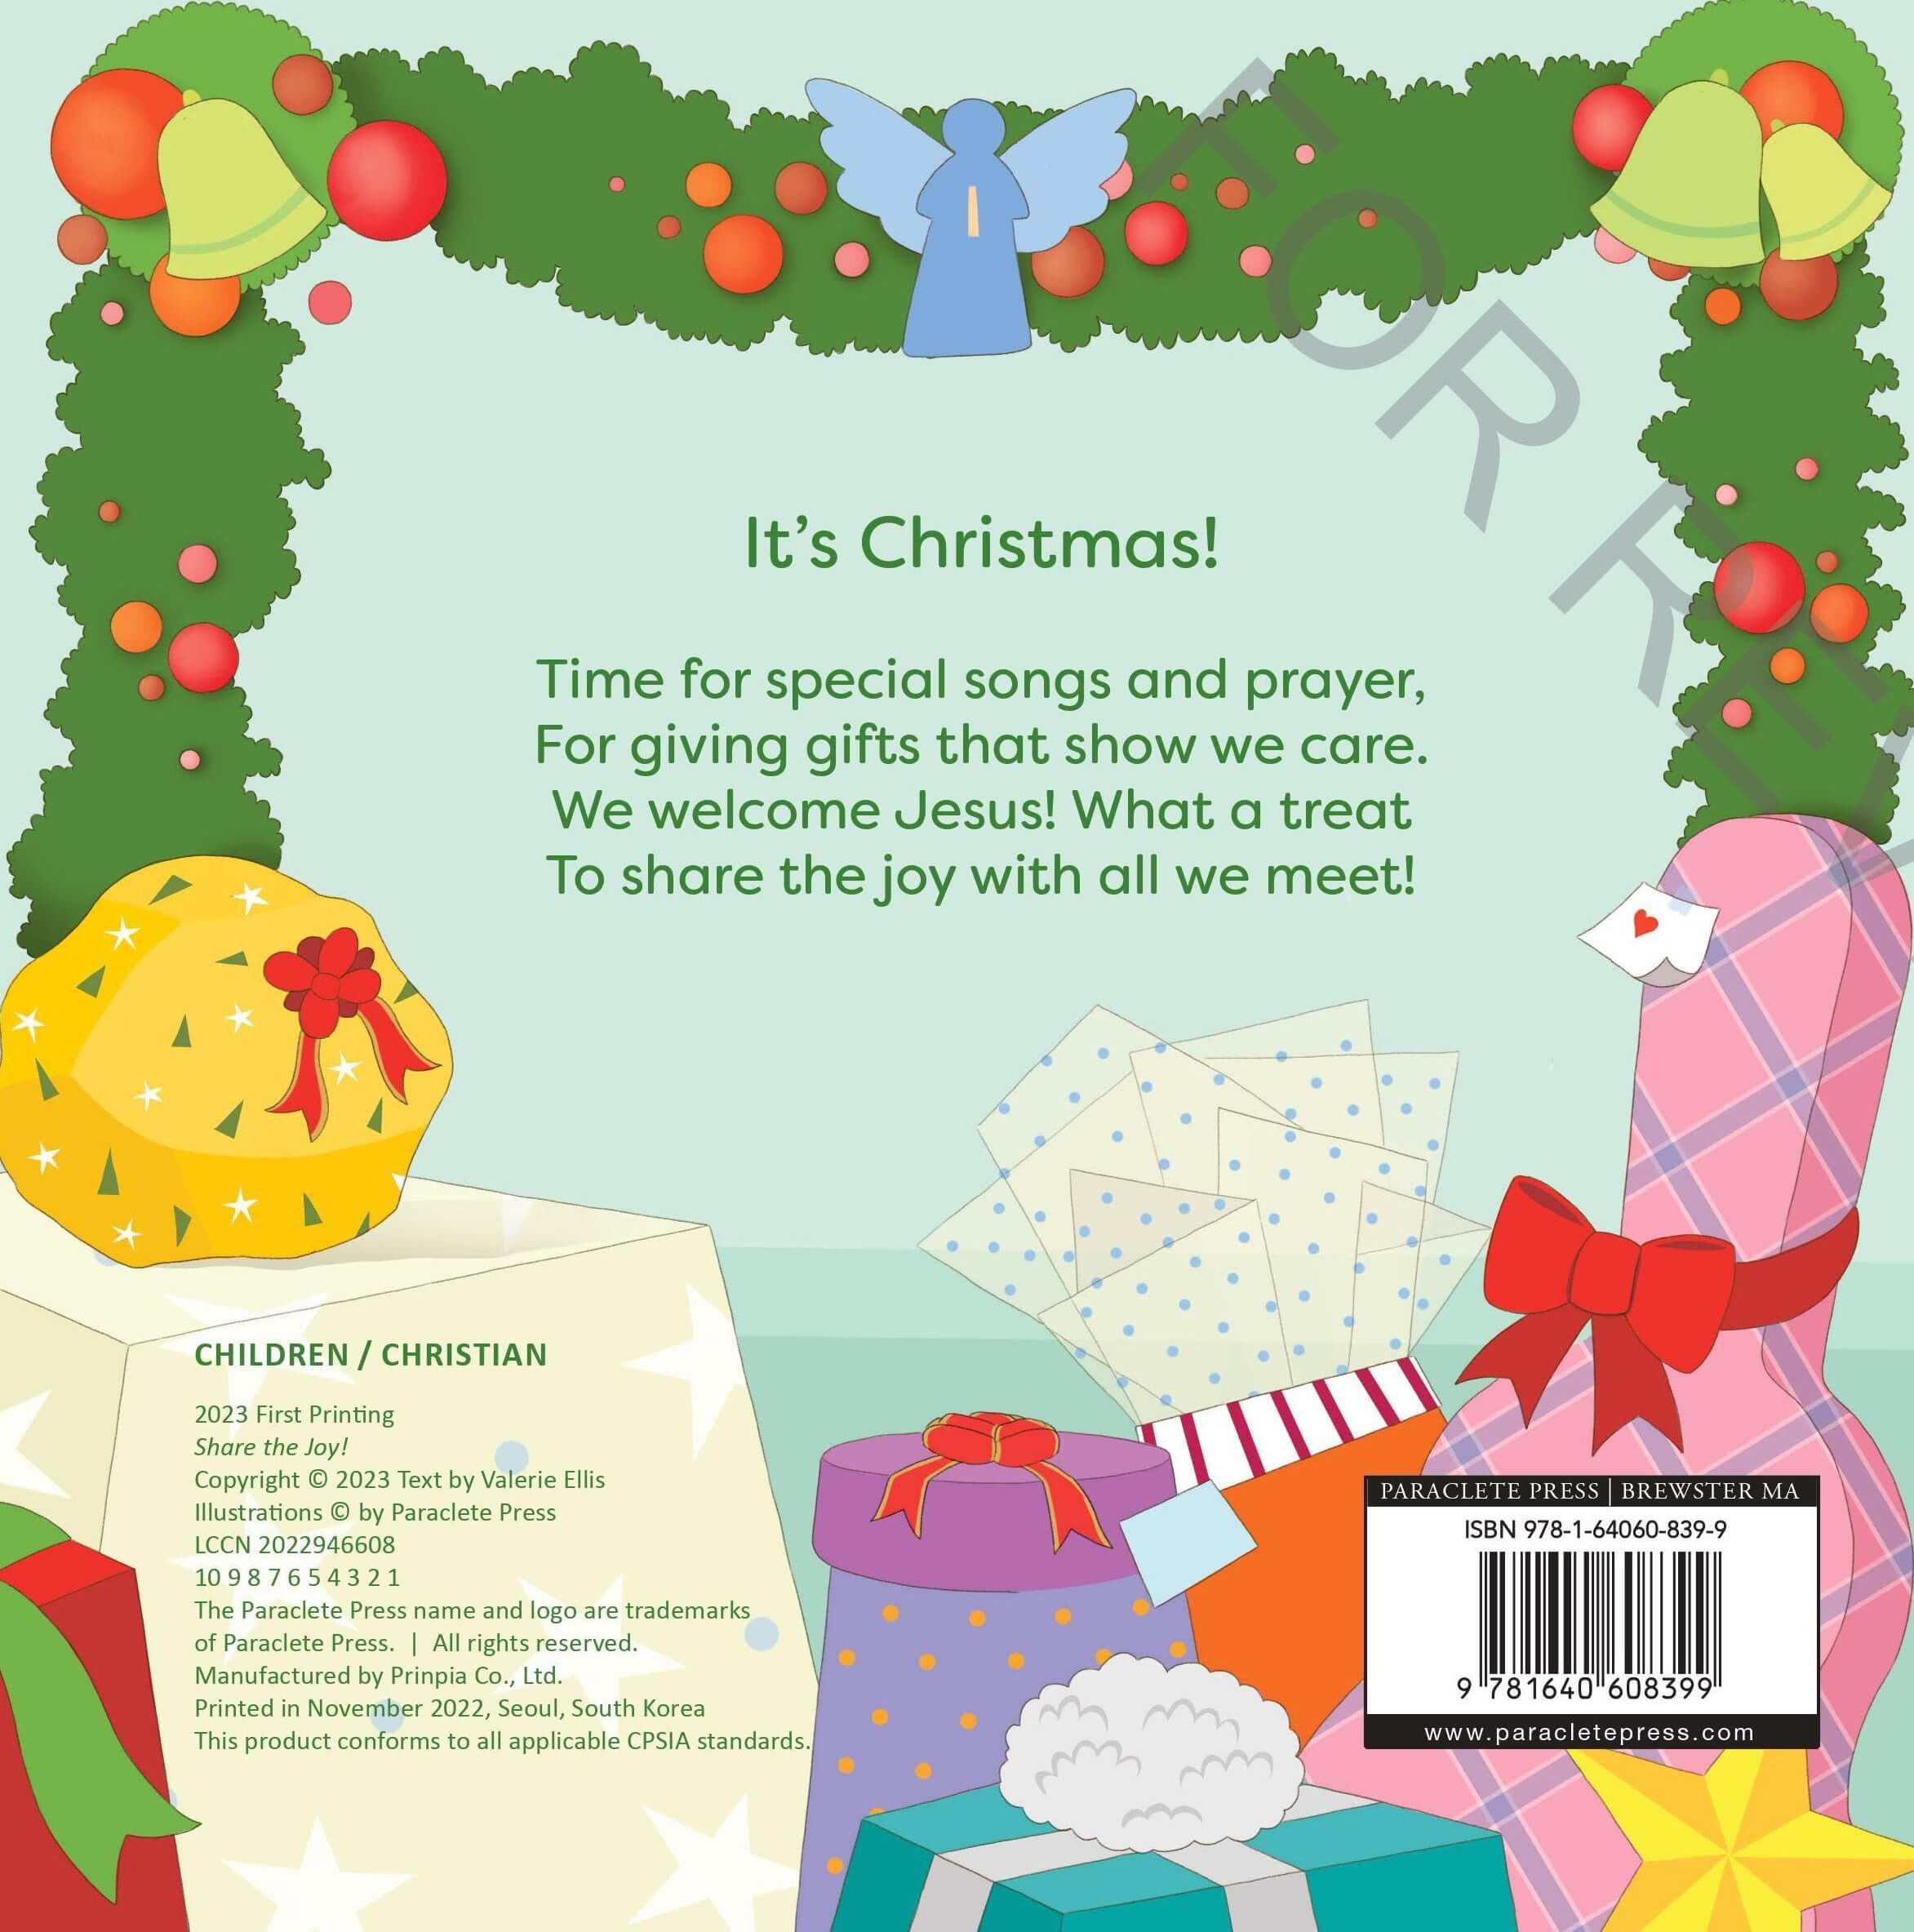 Back cover of Share the Joy! A Christmas Lift-the-Flap Book showing a pine garland and wrapped gifts with the words: It's Christmas! Time for joyful songs and prayer For giving gifts to show we care. We welcome Jesus! What a treat To share the joy with all we meet!